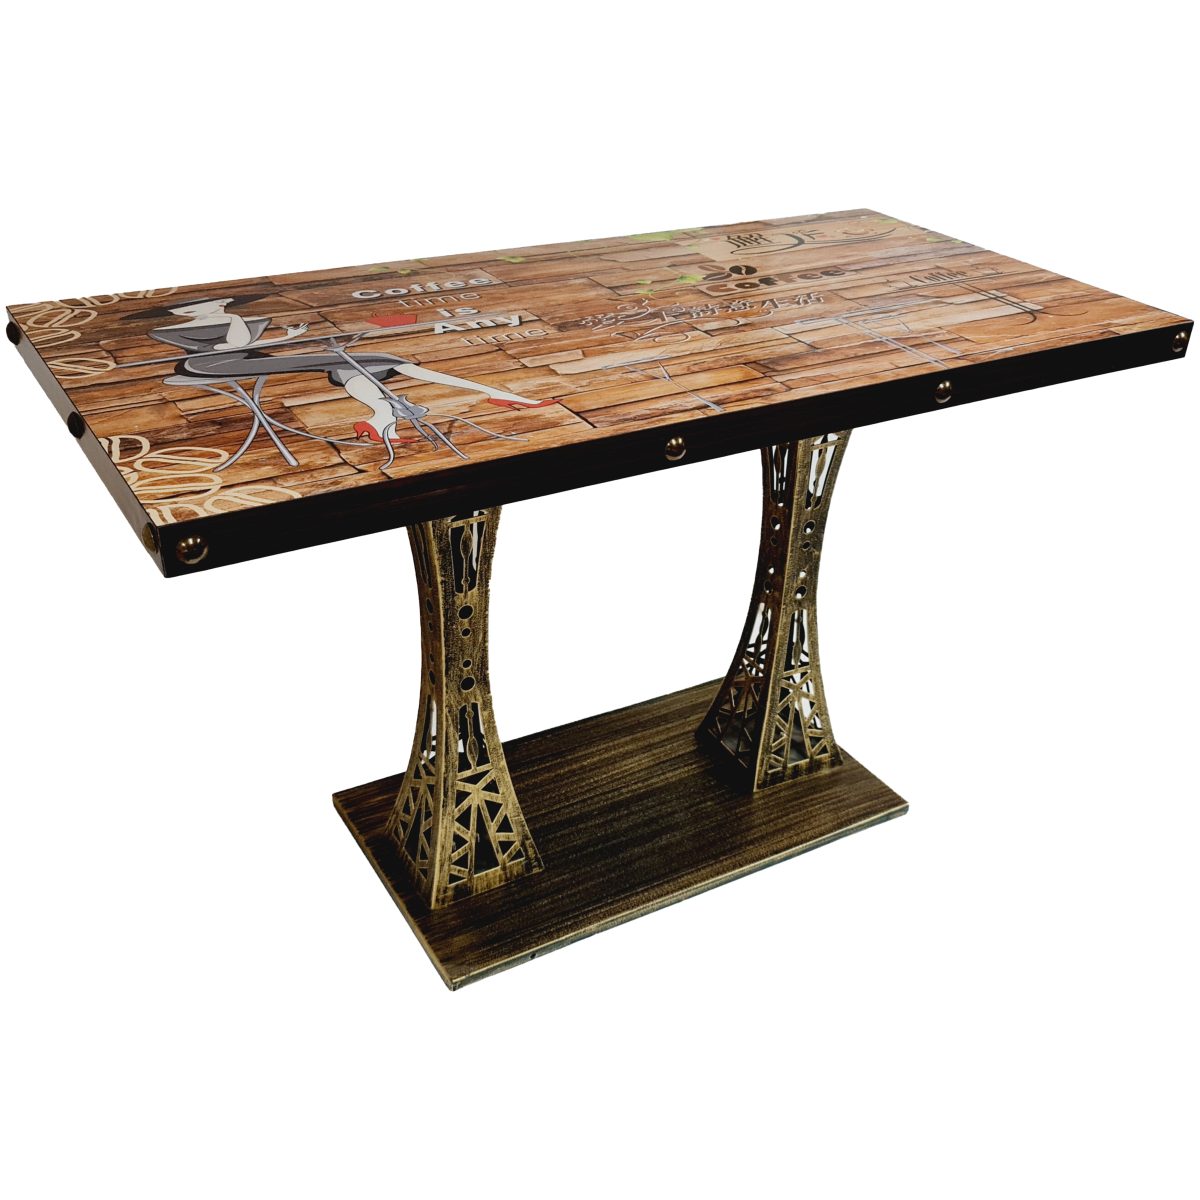 Café Table Top with Cast Iron Ornate Base